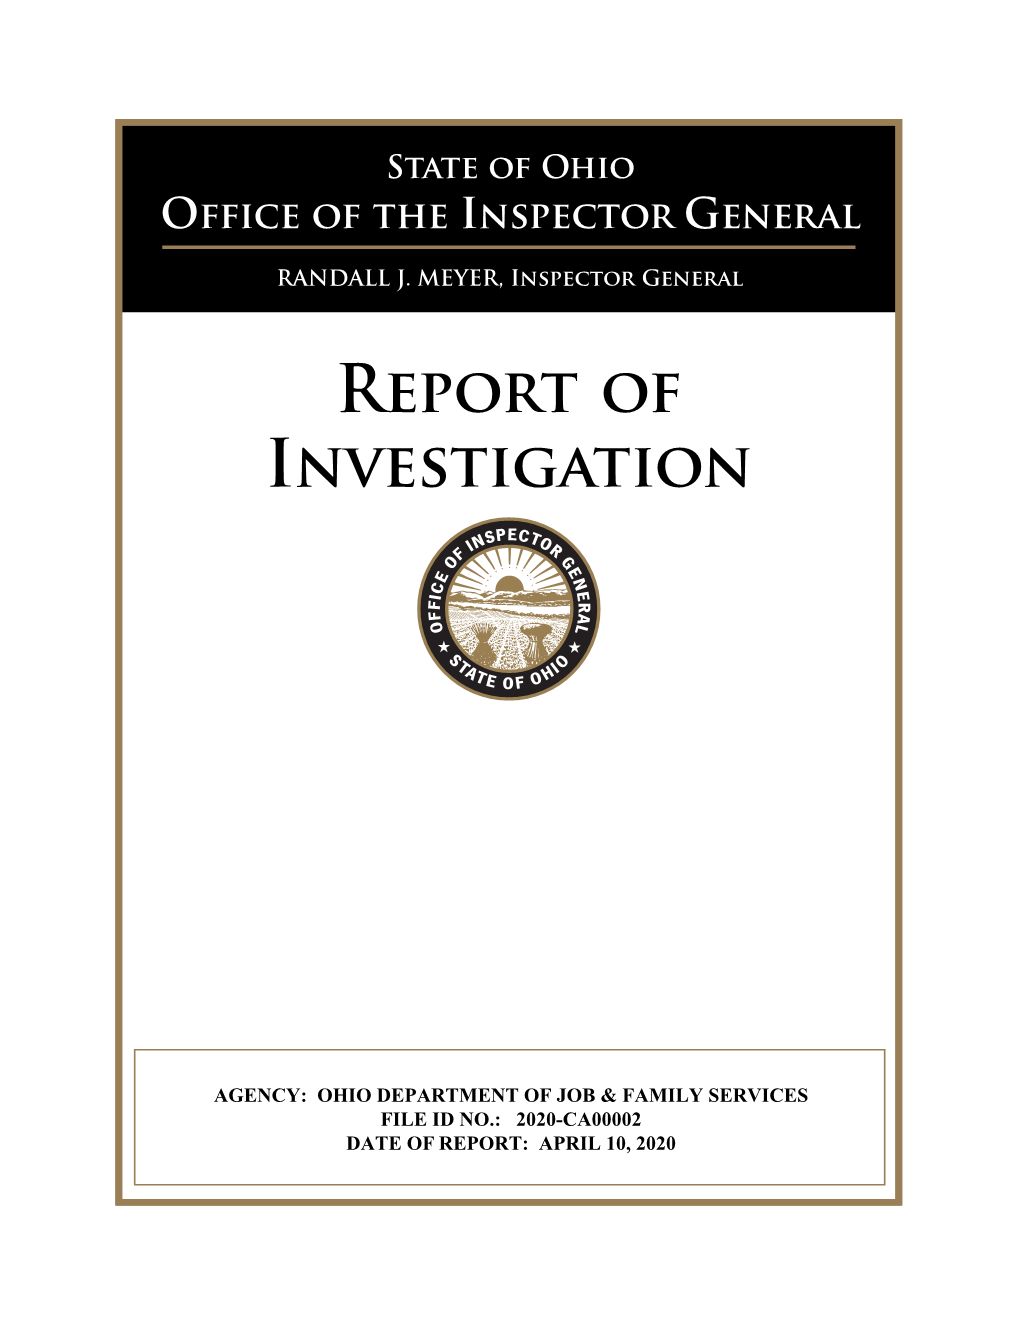 2020-CA00002 DATE of REPORT: APRIL 10, 2020 the Office of the Ohio Inspector General